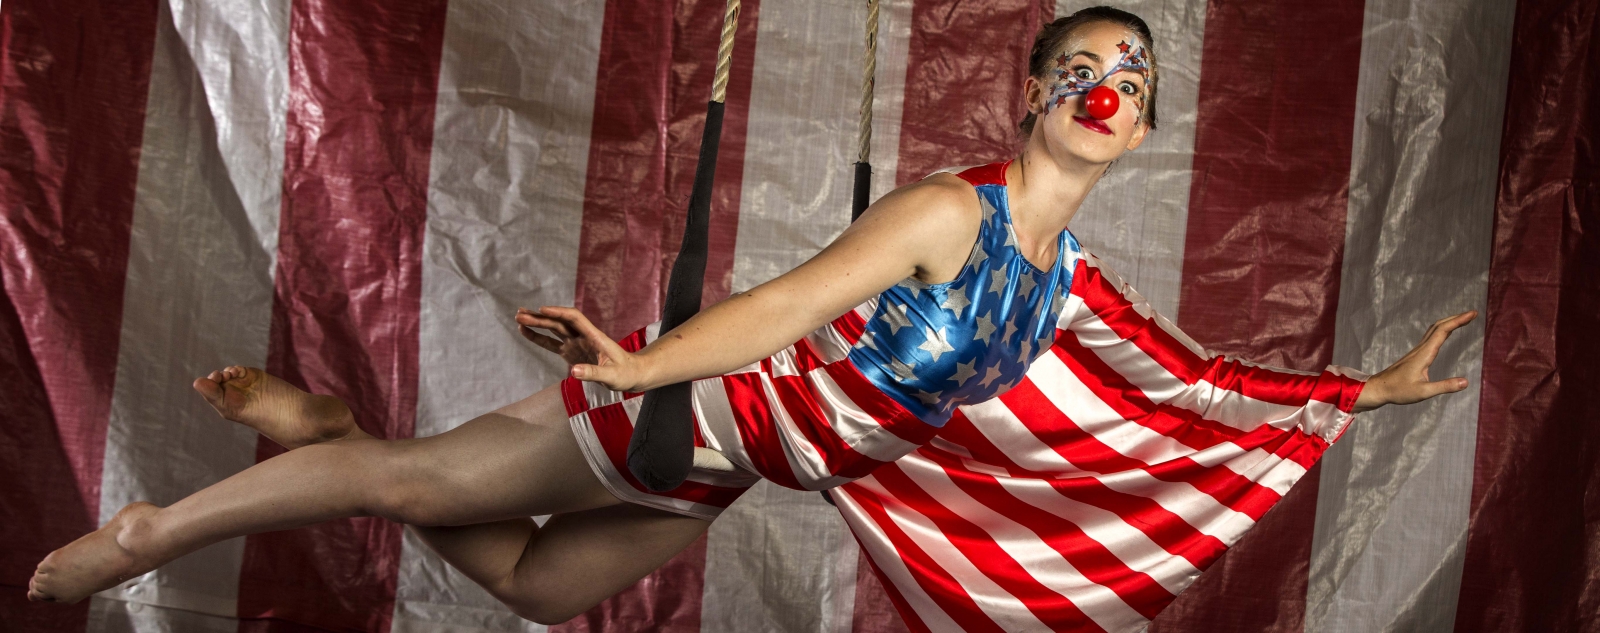 Joanna Wright '08 on a trapeze, dressed in a U.S. flag costume and a clown nose